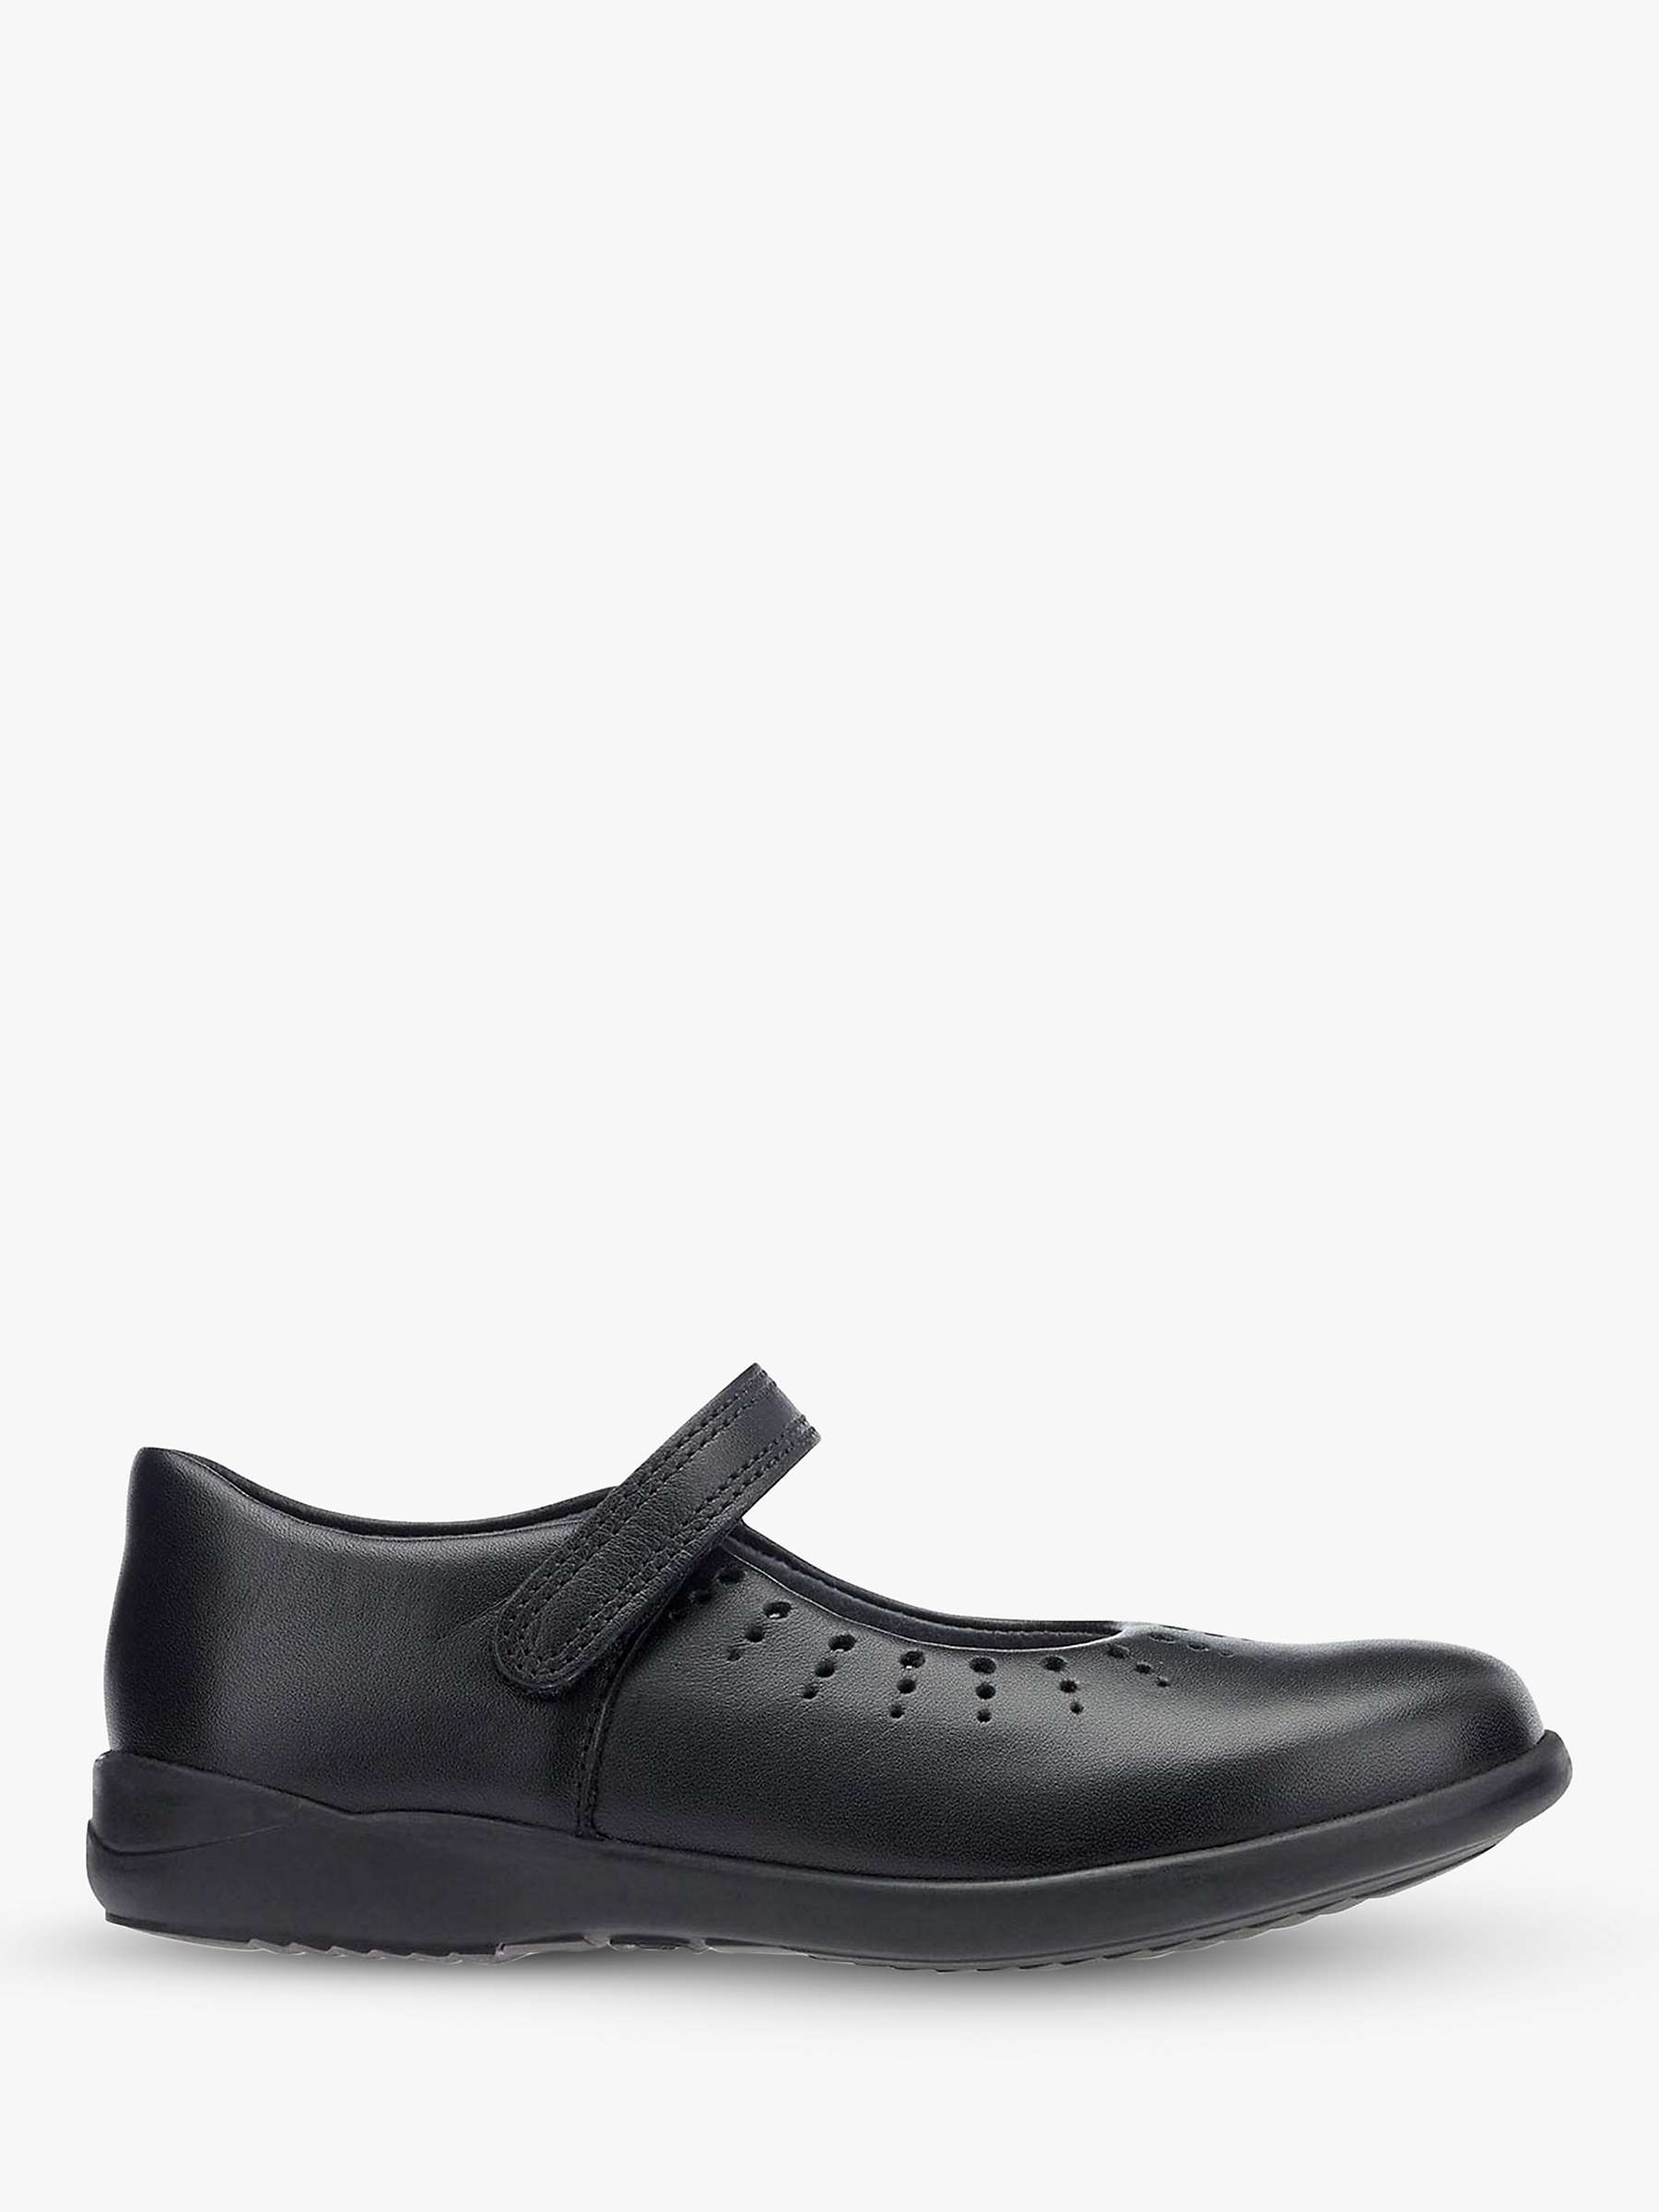 Buy Start-Rite Children's Mary Jane Leather Shoes, Black Online at johnlewis.com